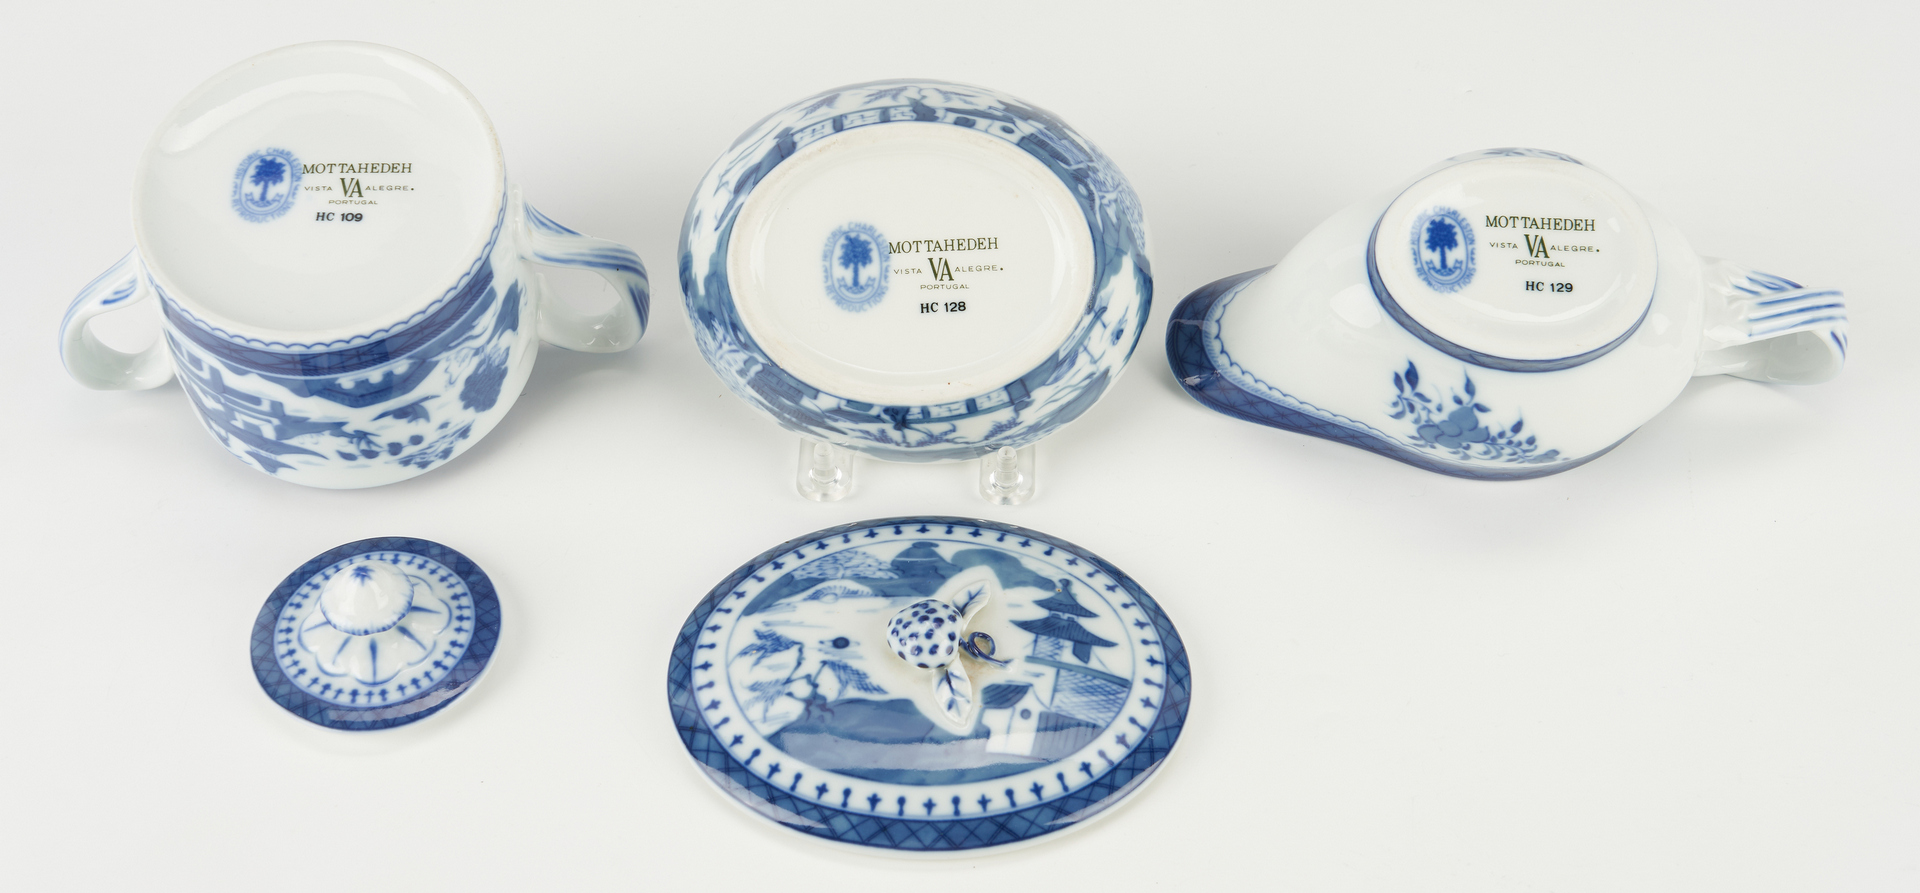 Lot 317: 16 Mottahedeh, Historic Charleston, Canton Serving Pieces